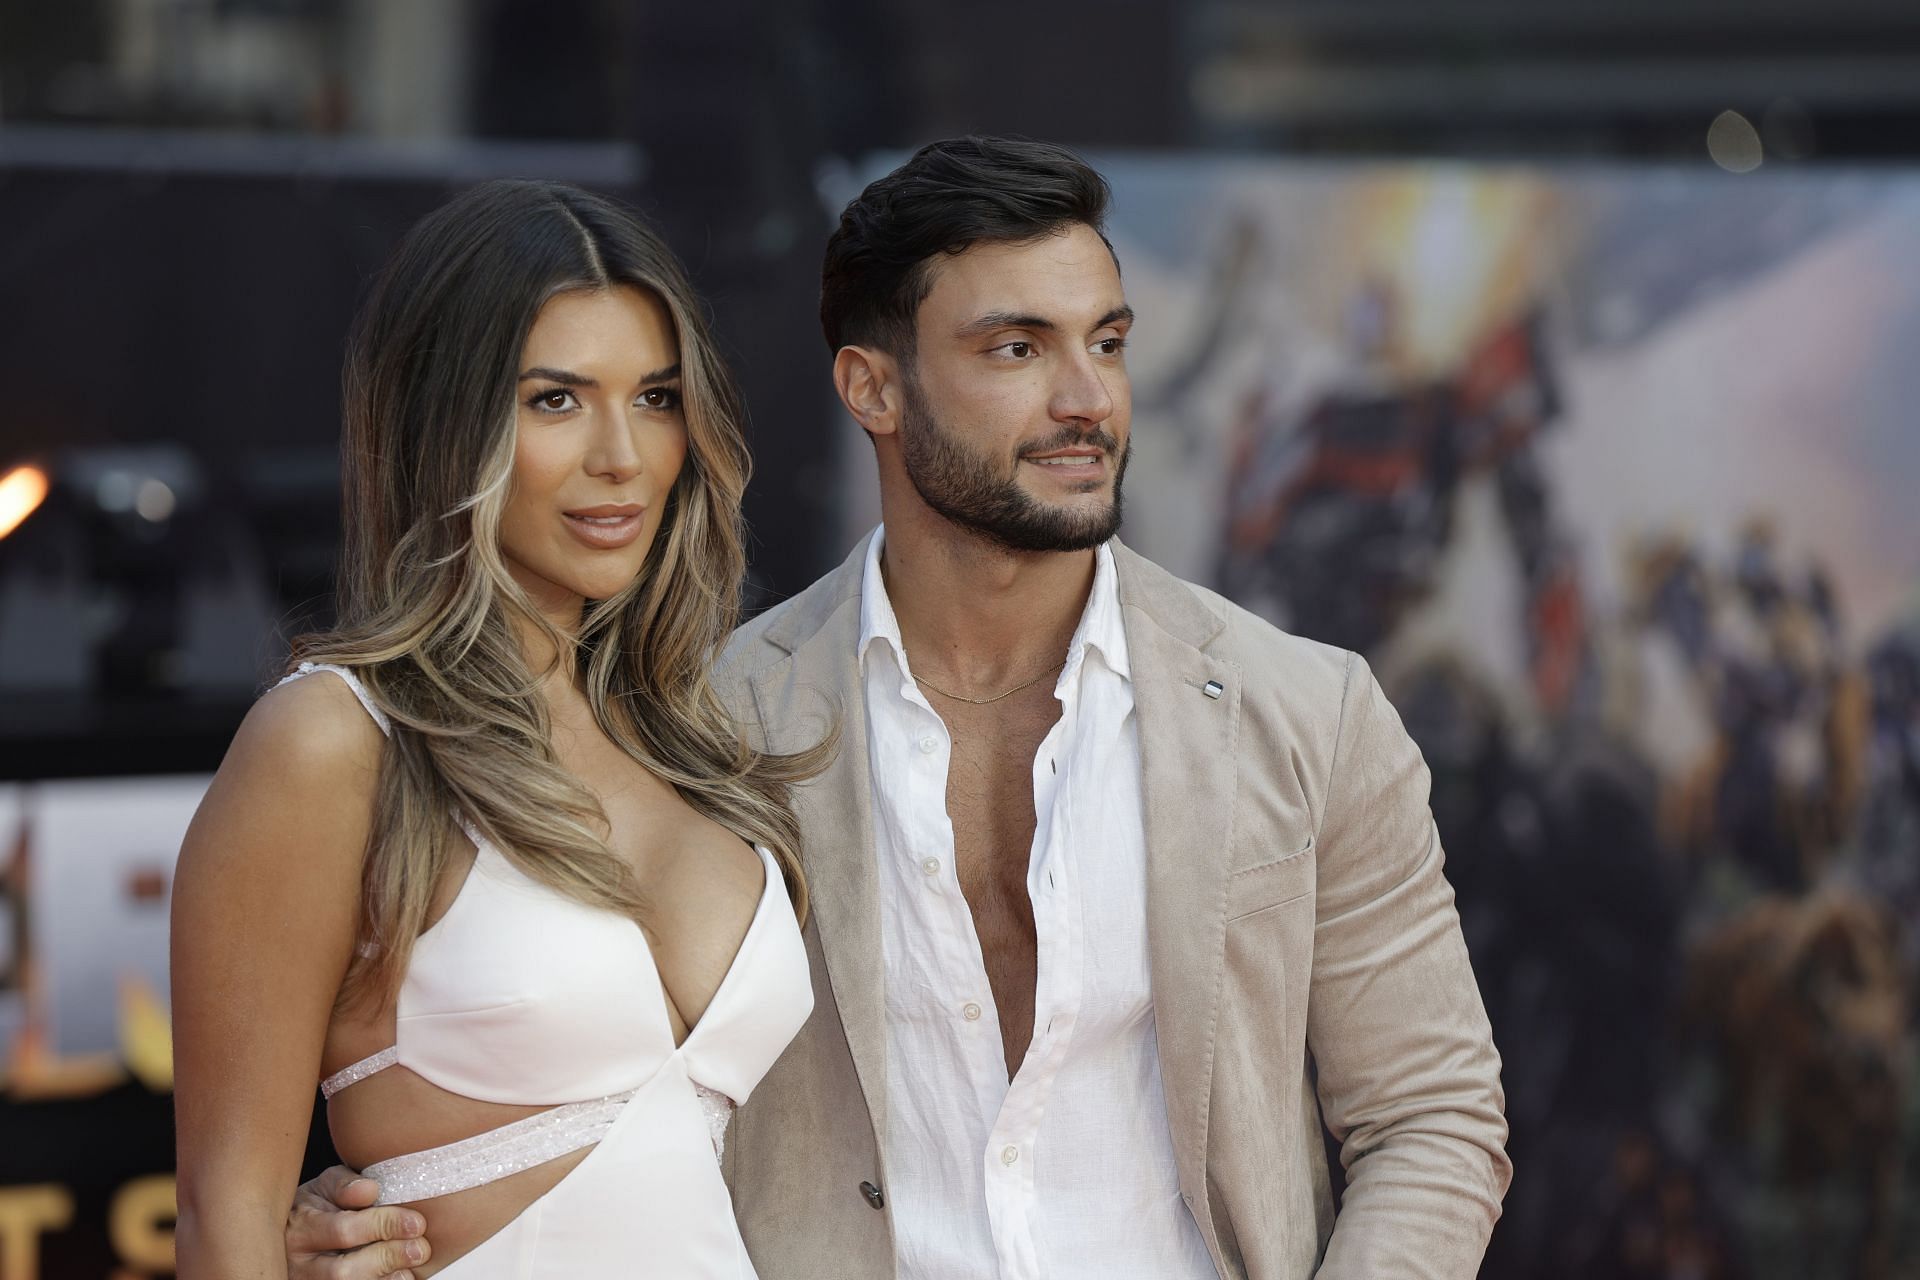 Ekin-Su Culculoglu with ex-boyfriend, Davide at the Premiere of &quot;Transformers: Rise of the Beasts&quot; (Image via Getty/John Phillips)